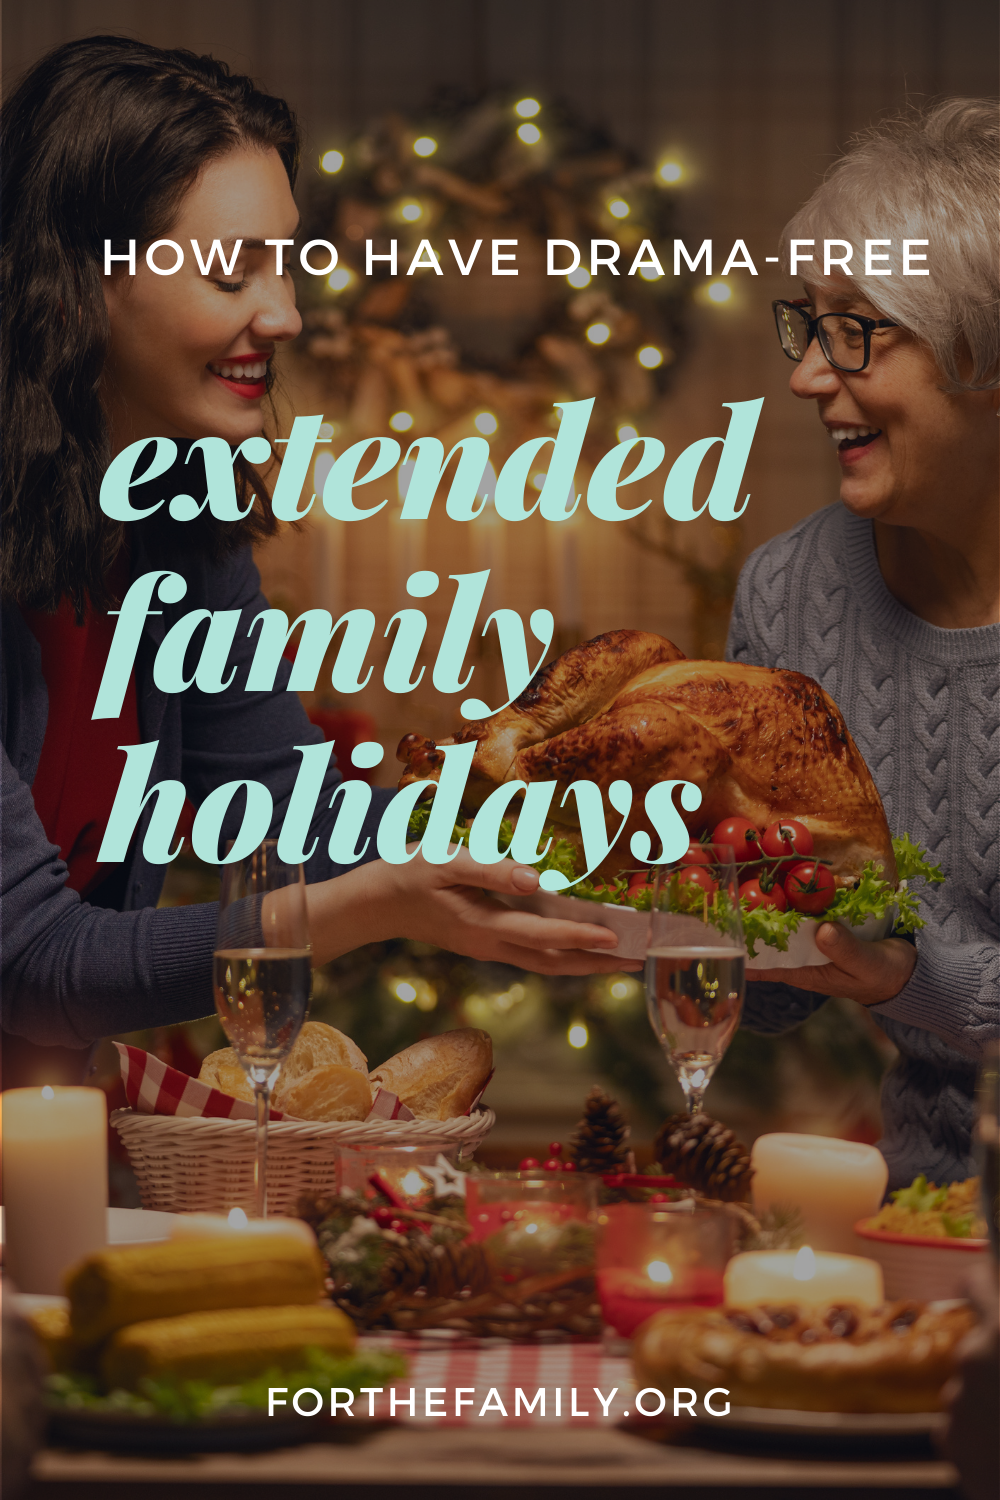 How to Have Drama-Free Extended Family Holidays